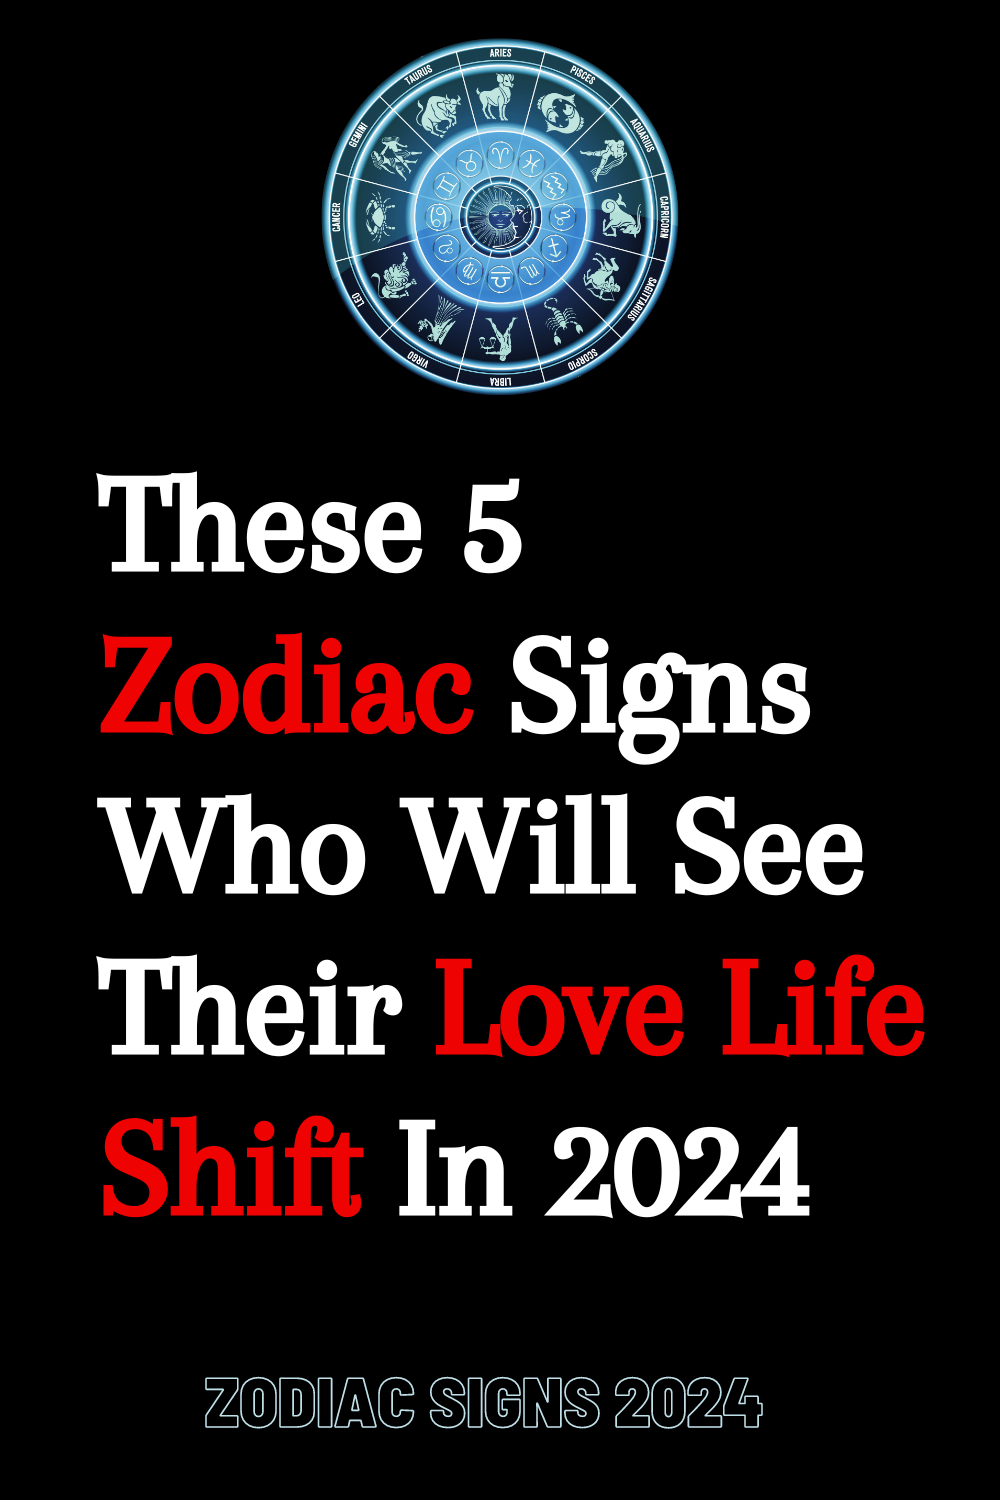 These 5 Zodiac Signs Who Will See Their Love Life Shift In 2024